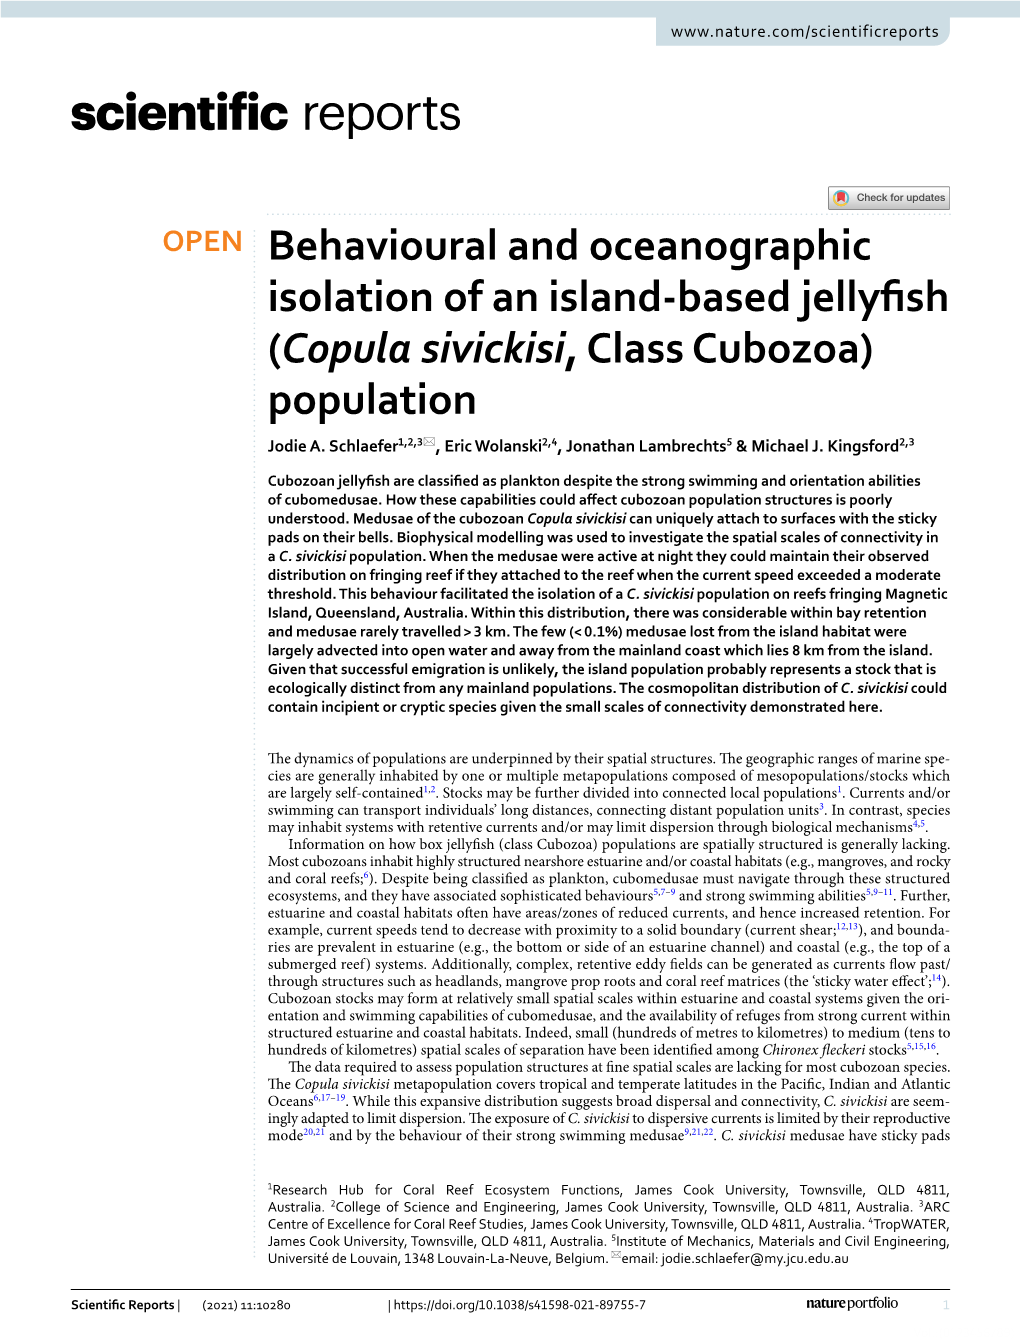 Behavioural and Oceanographic Isolation of an Island-Based Jellyfish